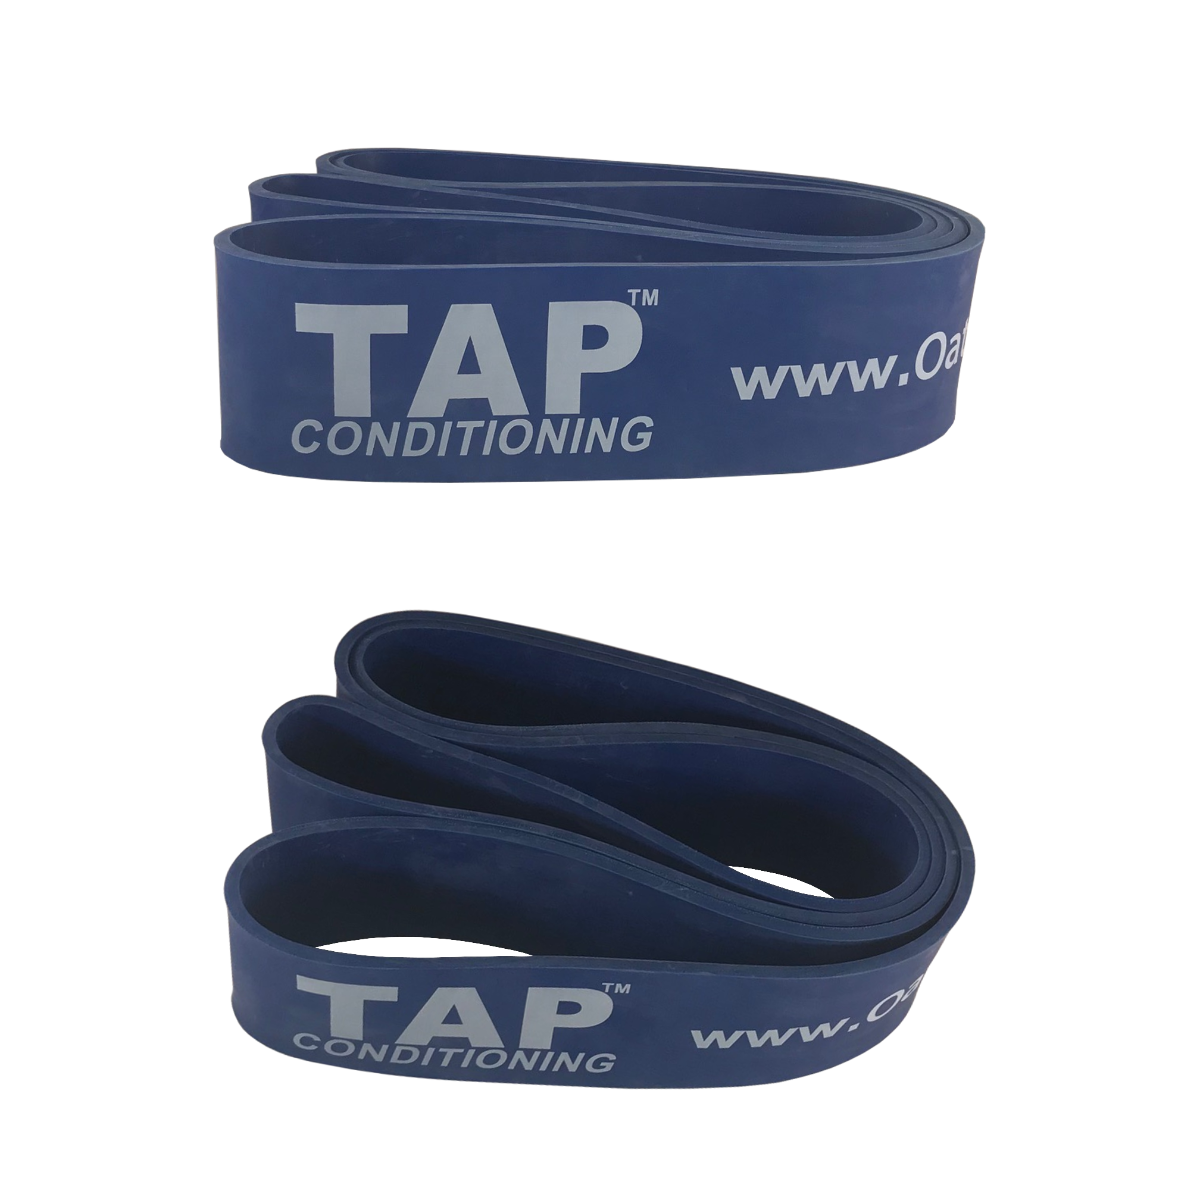 TAP™ Giant Flat Band | Bands for Pullups, Stretching, or Resisted Body Weight Exercises